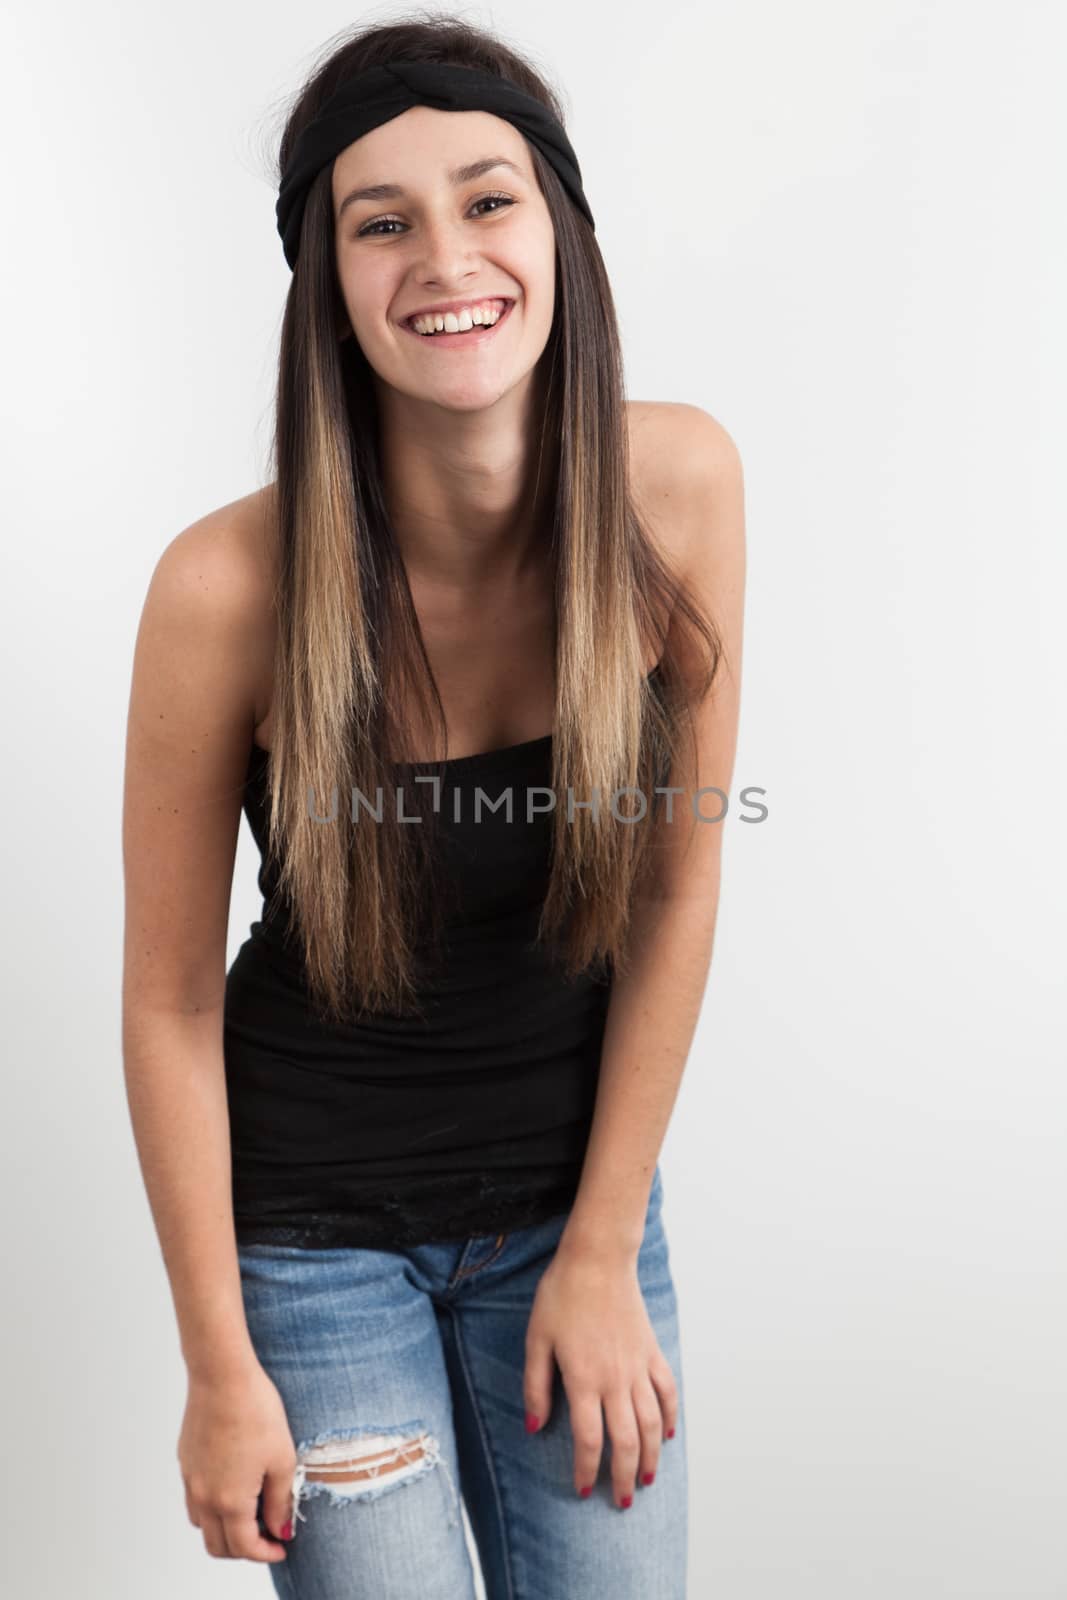 Young woman posing in front a white background by Izaphoto